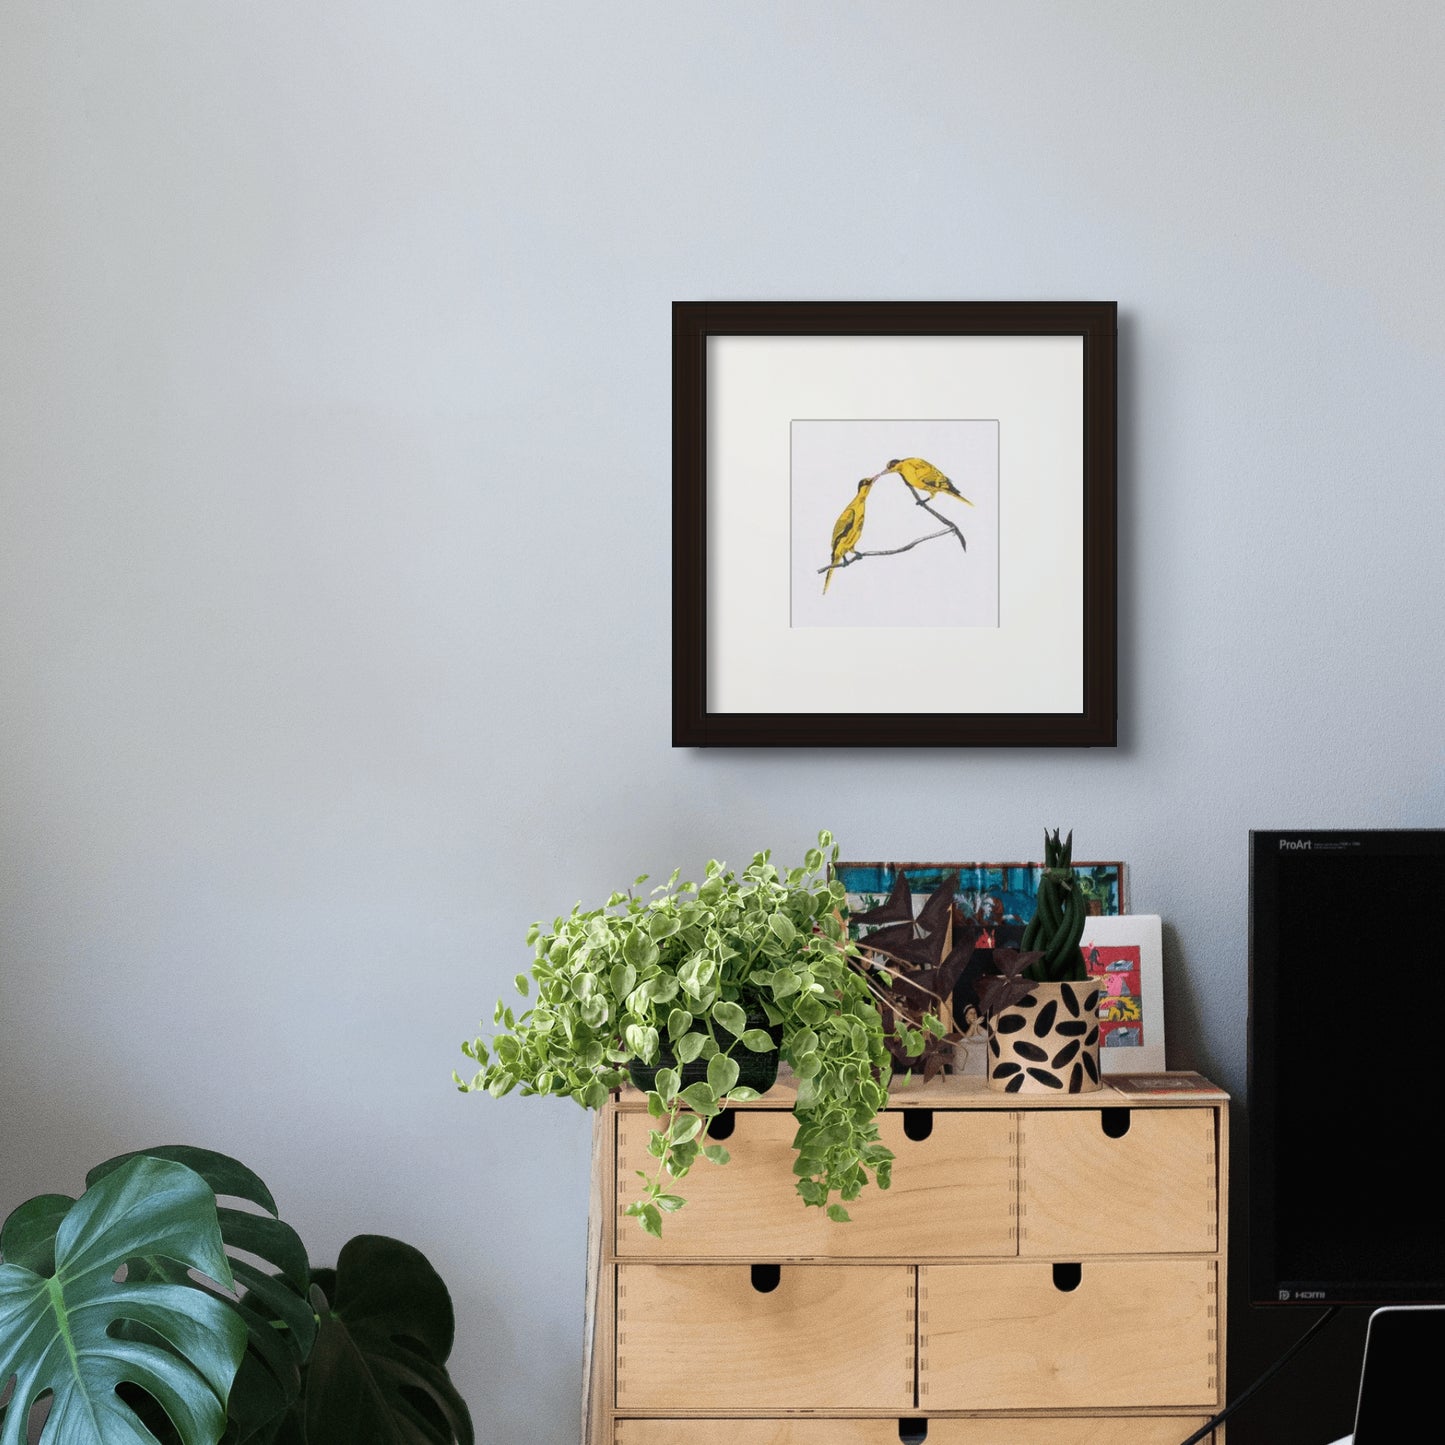 6” x 6” giclée art print with black frame and cream colour mat, in a home office setting. Line drawing with coloured brush pen drawing of a pair of yellow oriole birds, with their beaks touching. In a black frame and cream colour mat.